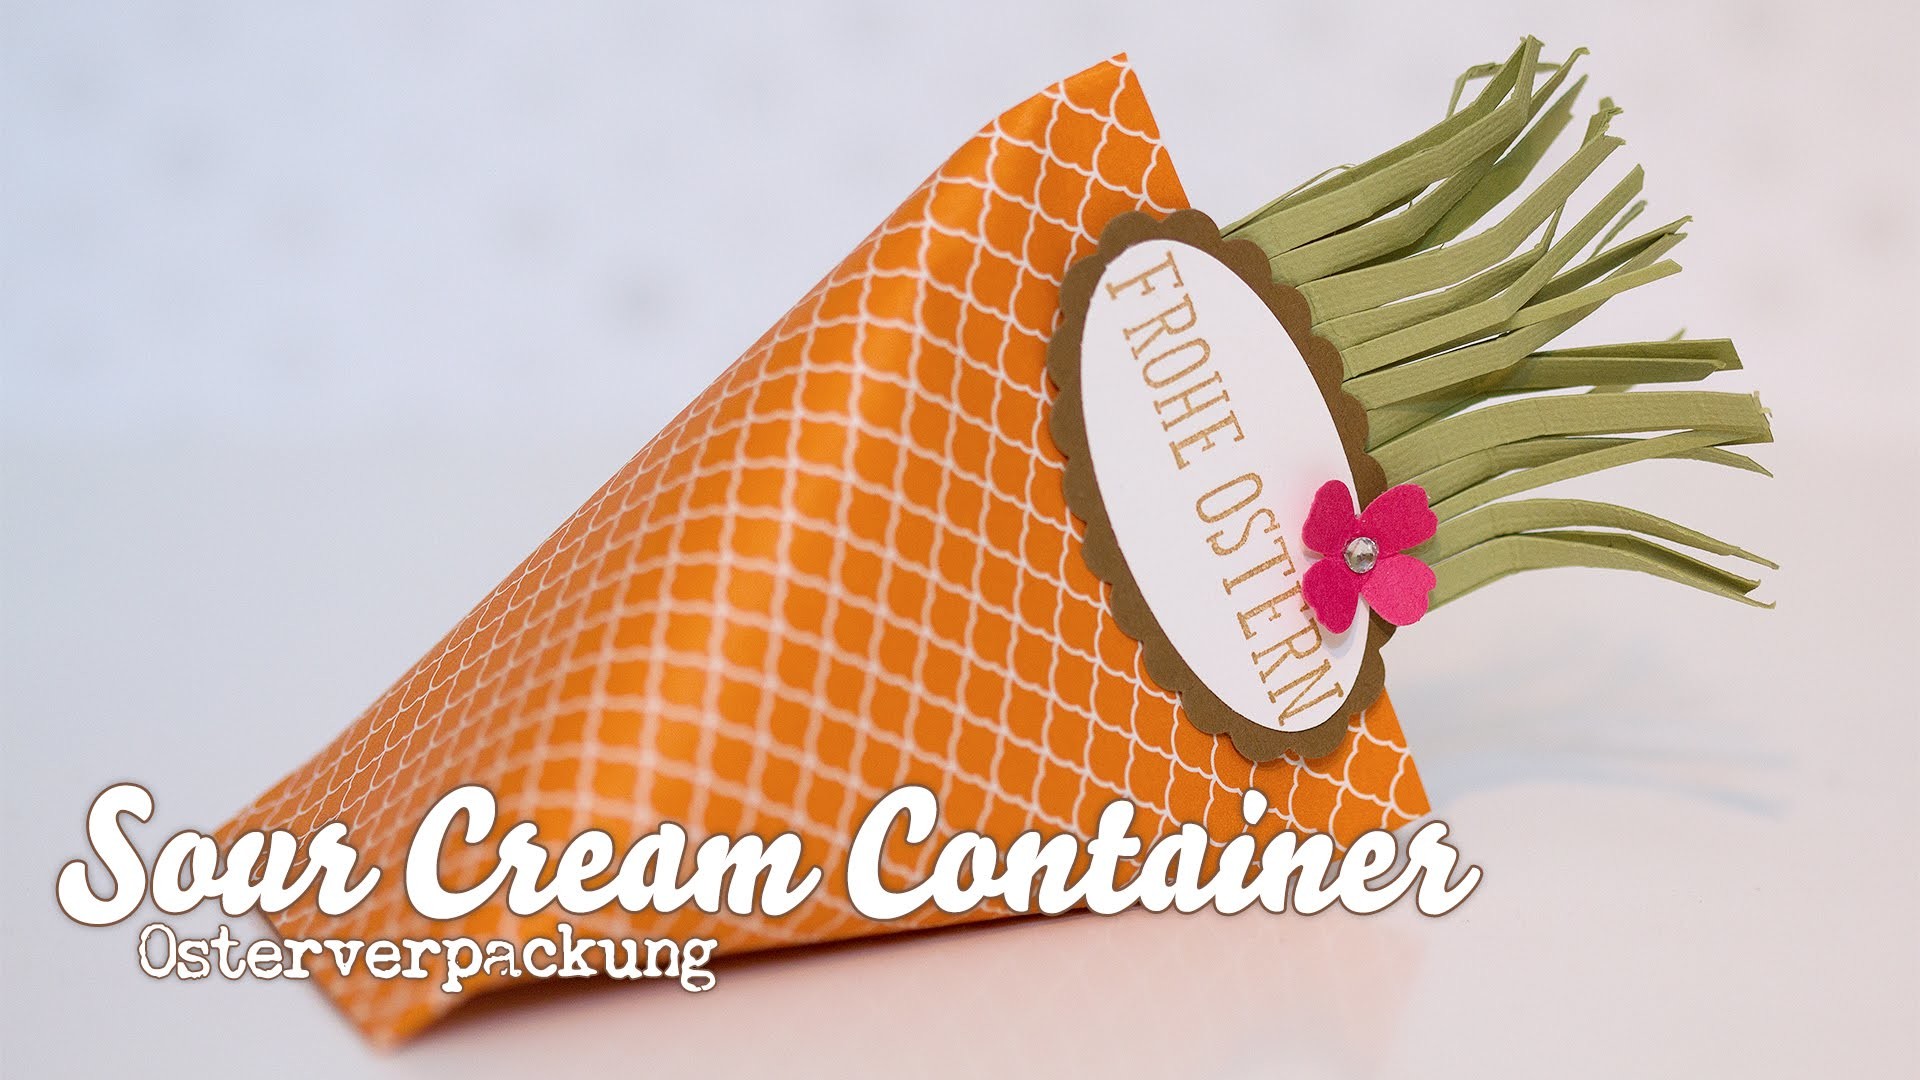 Sour Cream Container - Verpackung Karotte - Stampin’ Up!